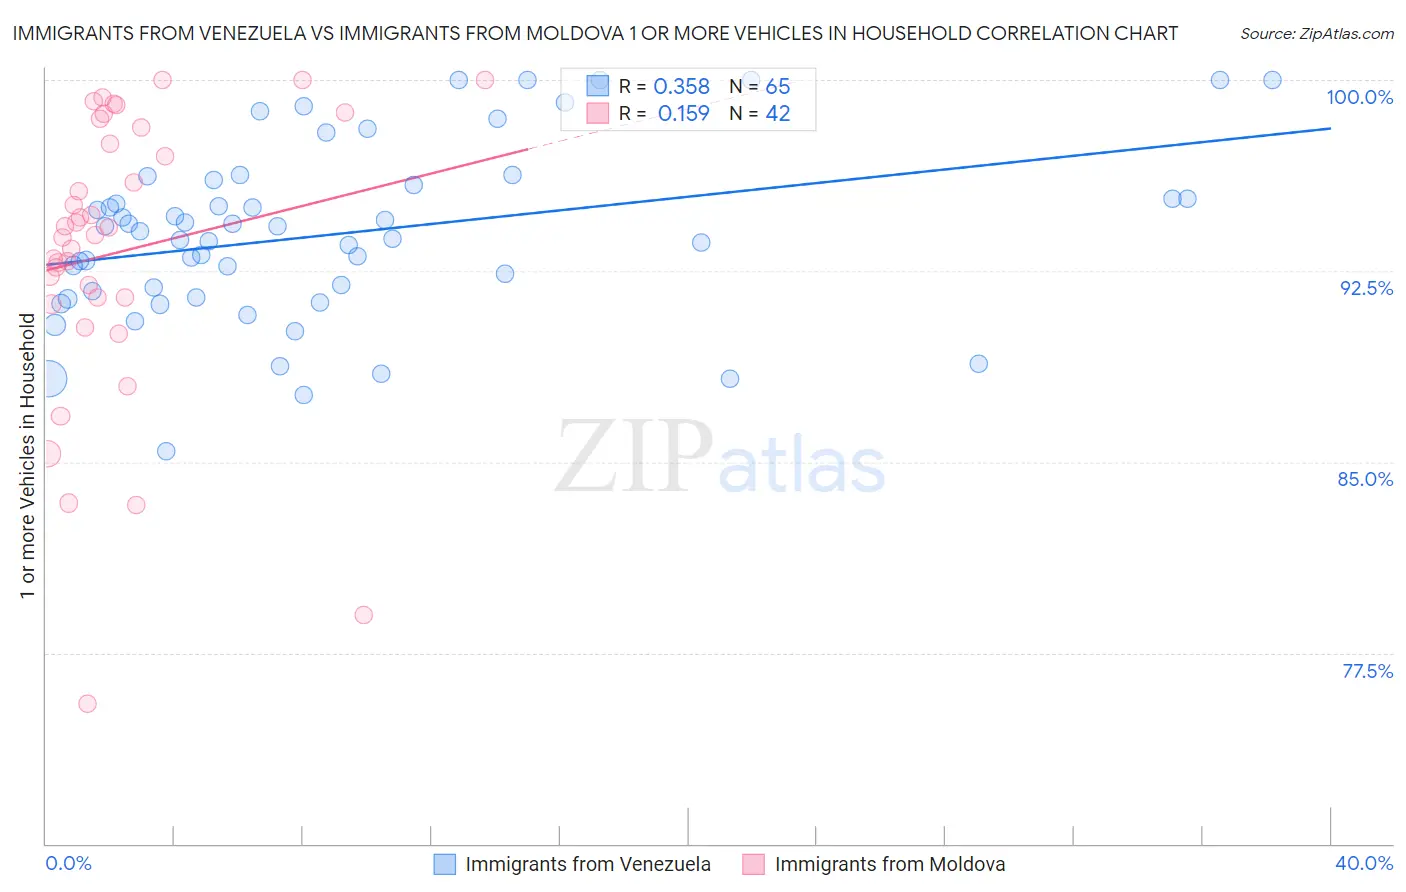 Immigrants from Venezuela vs Immigrants from Moldova 1 or more Vehicles in Household